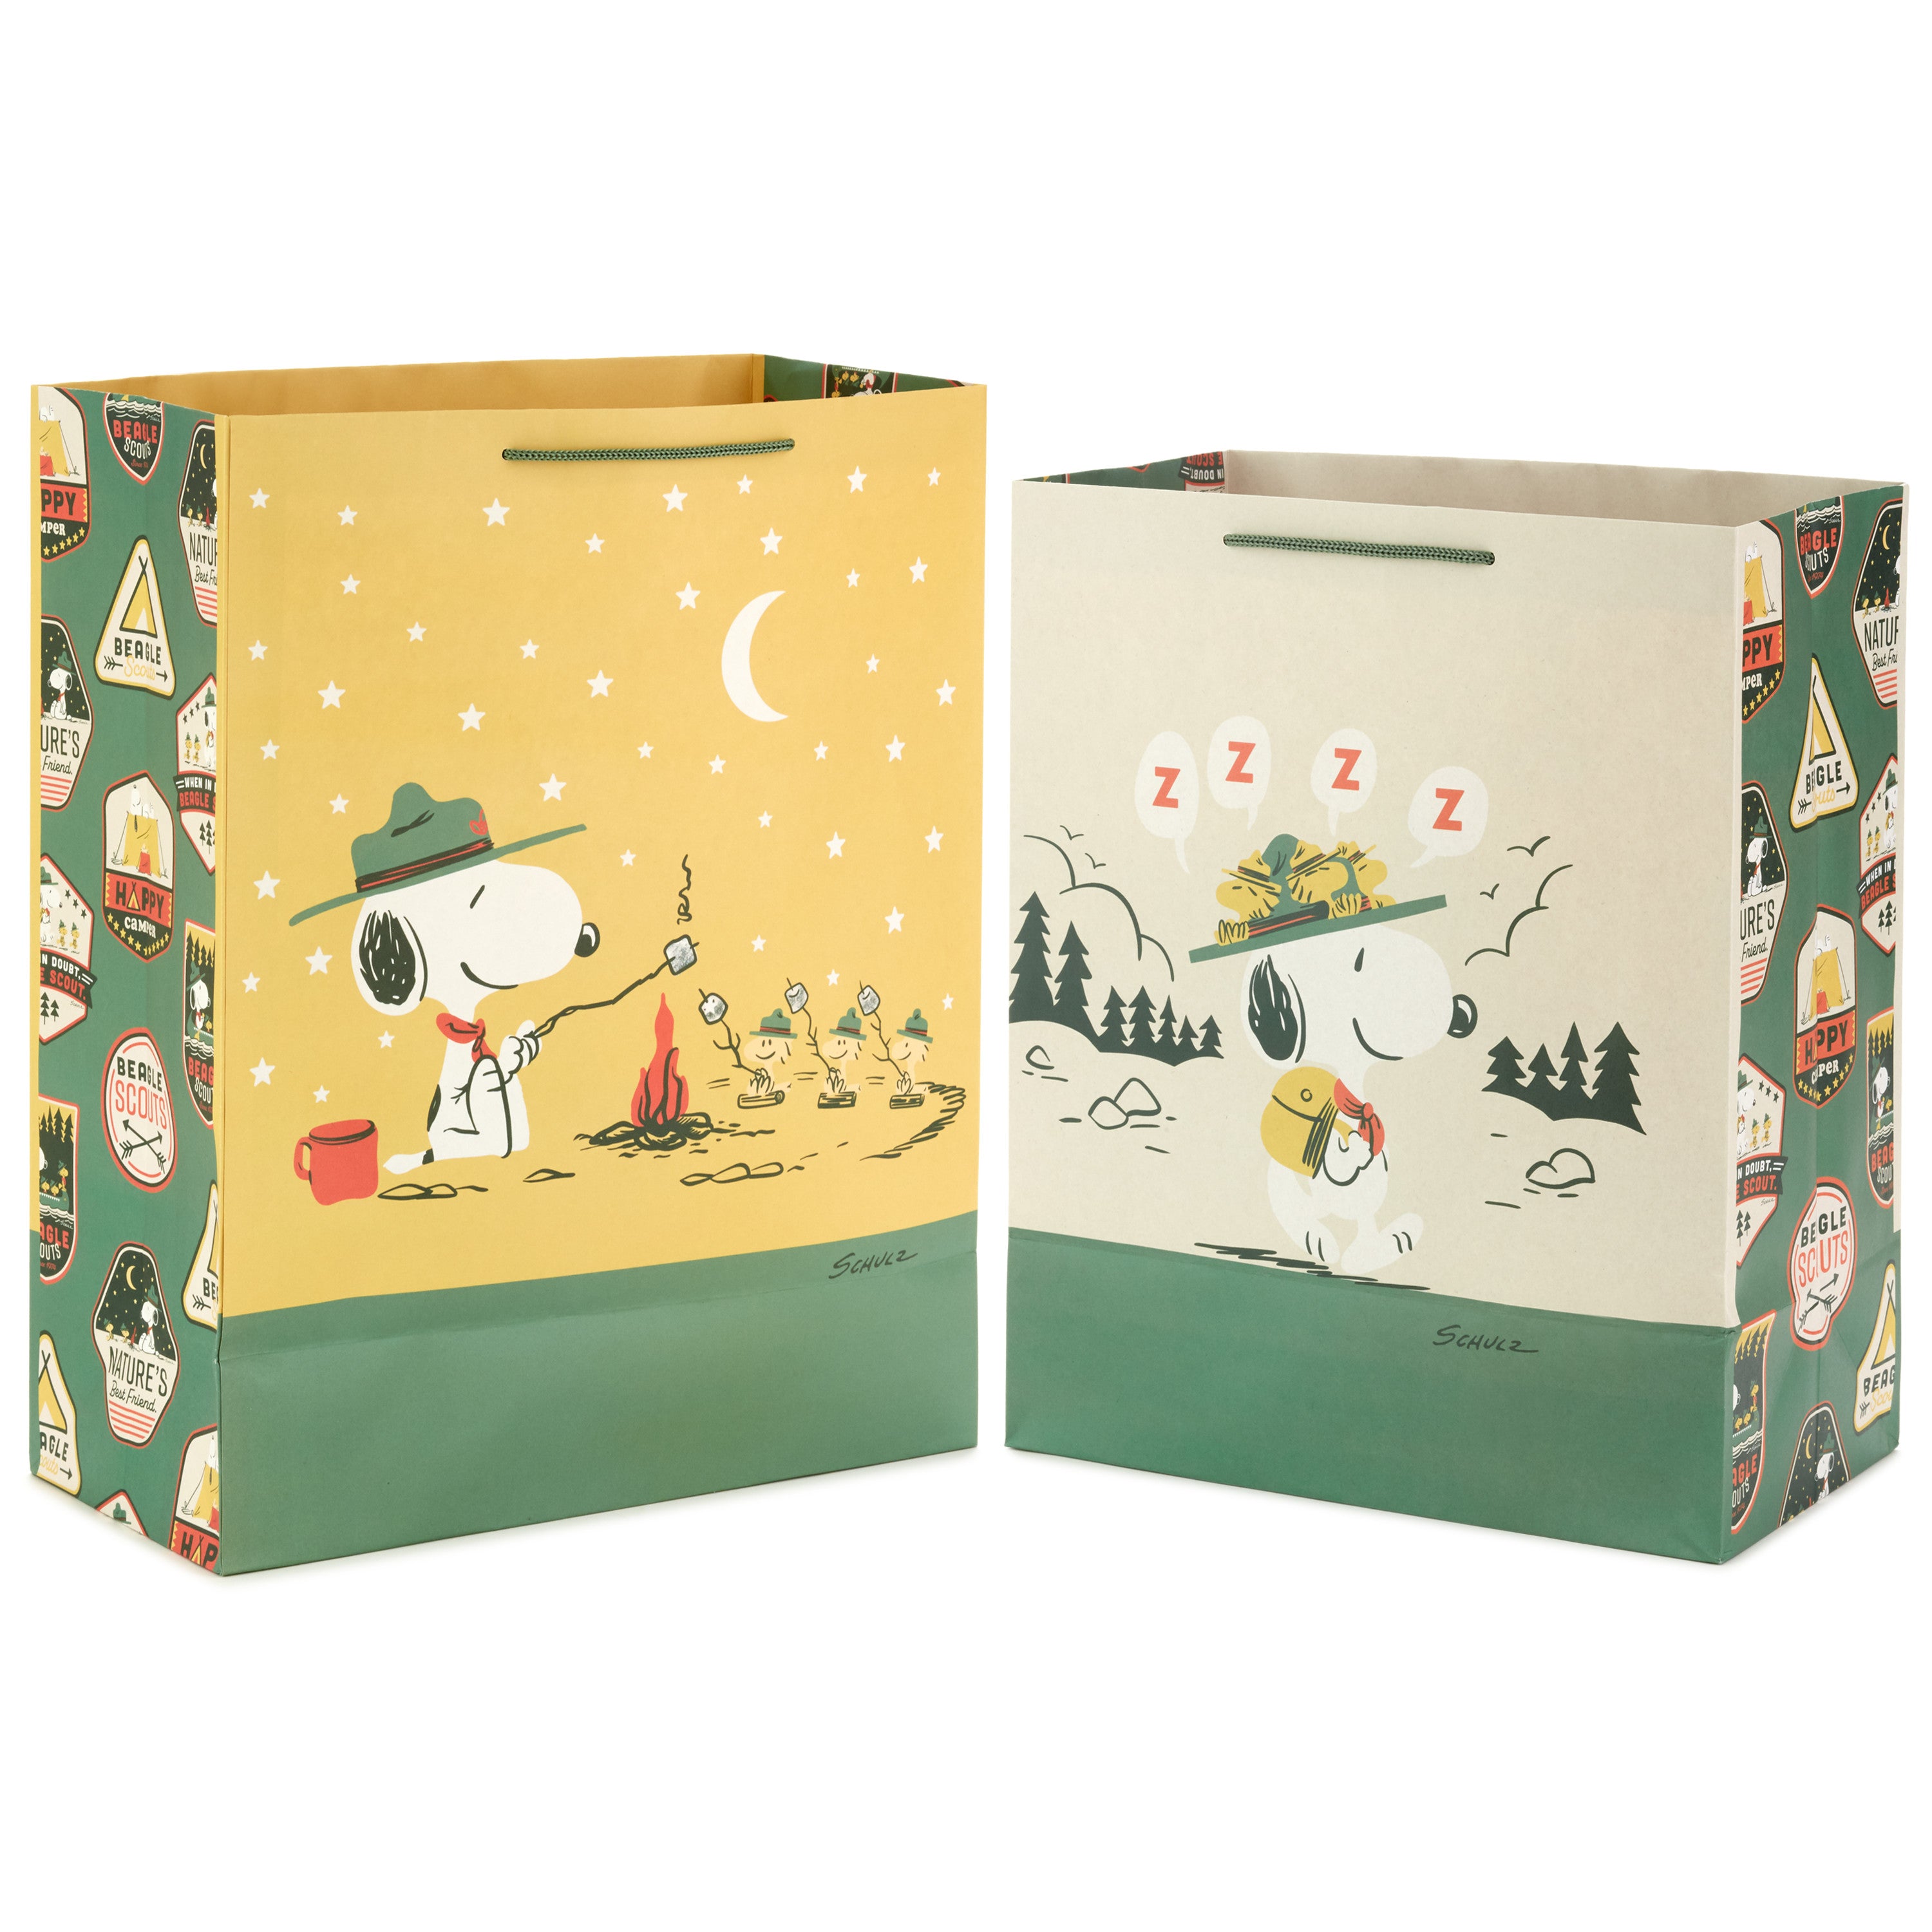 Hallmark Peanuts Gift Bag Bundle (2 Bags: 1 Large 13", 1 XL 15") Snoopy and Woodstock for Father's Day, Birthdays, Summer Camp